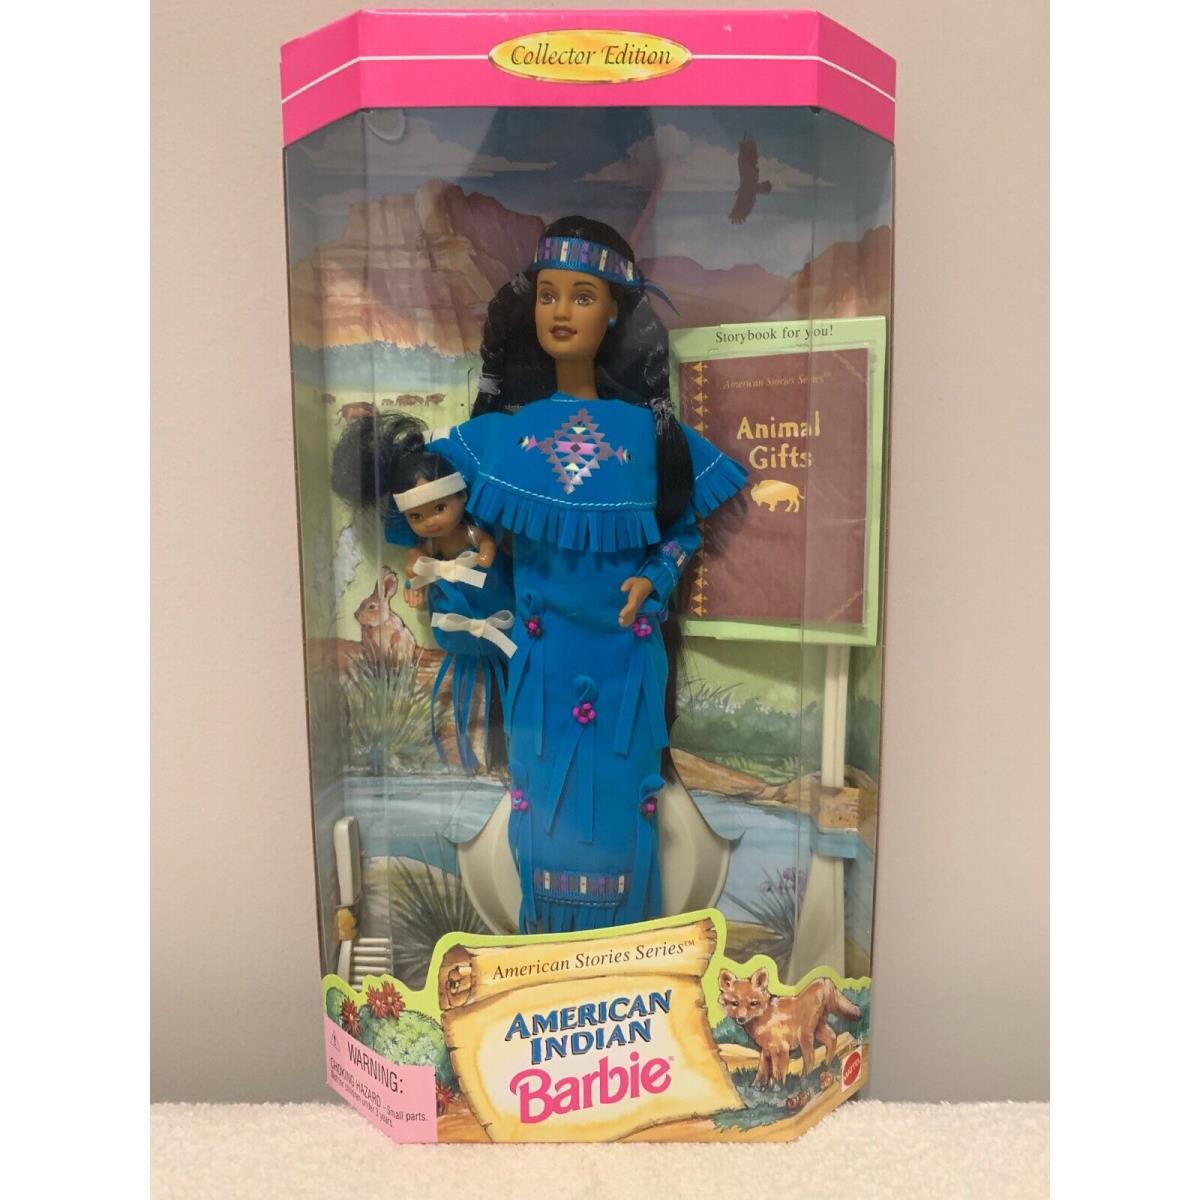 American Indian Barbie-american Stories Series Collector-1996 - 17313-New Nrfb